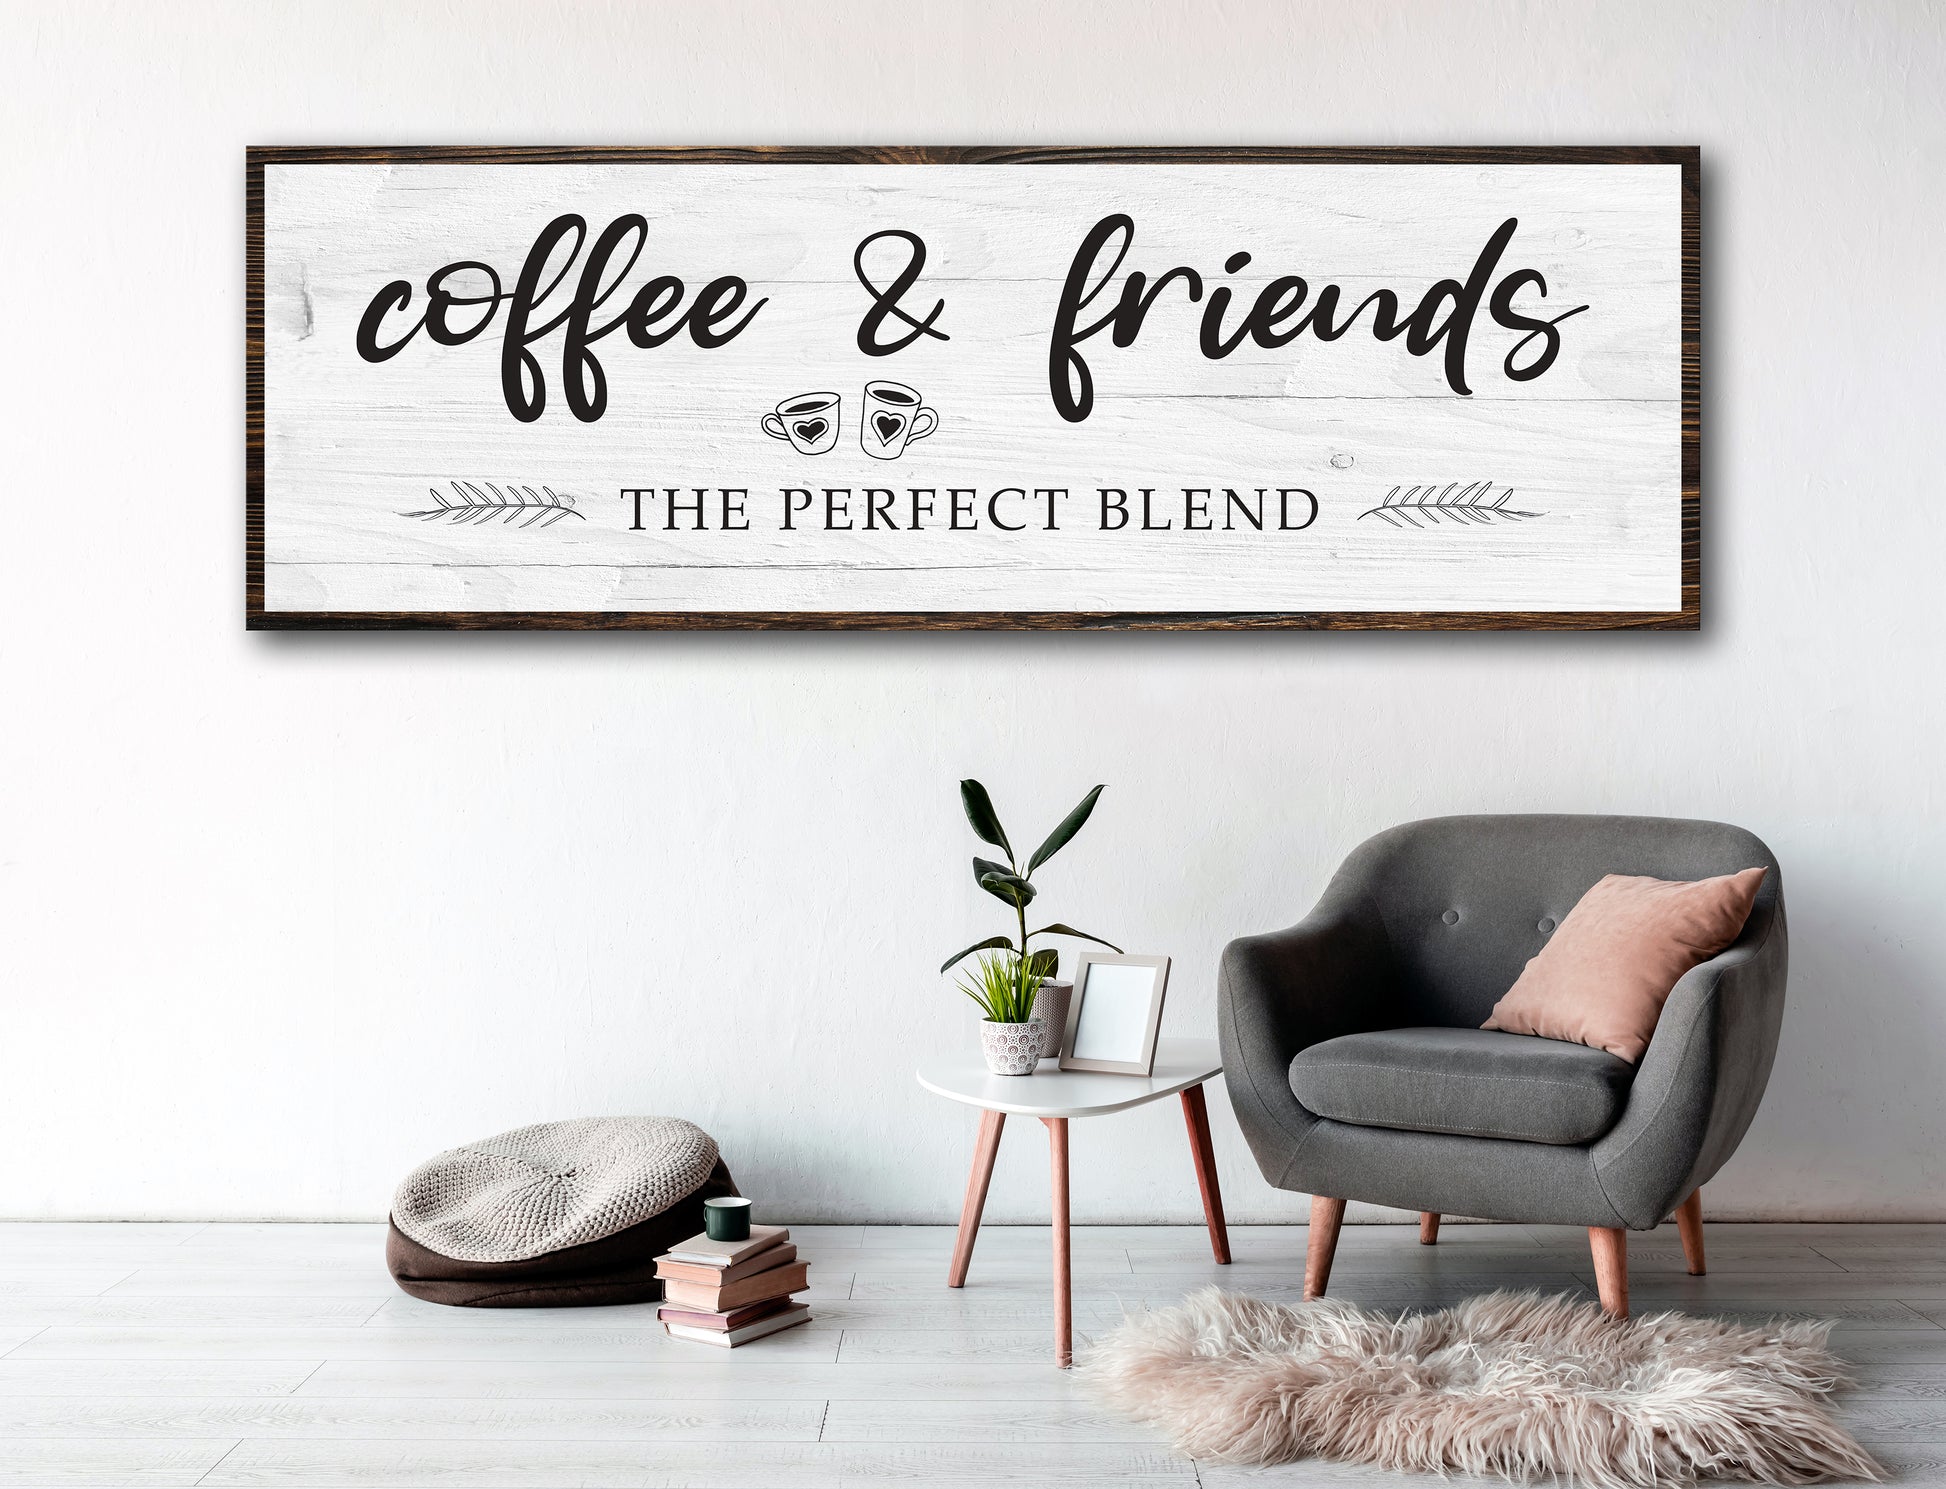 Coffee and Friends The Perfect Blend Sign - Image by Tailored Canvases